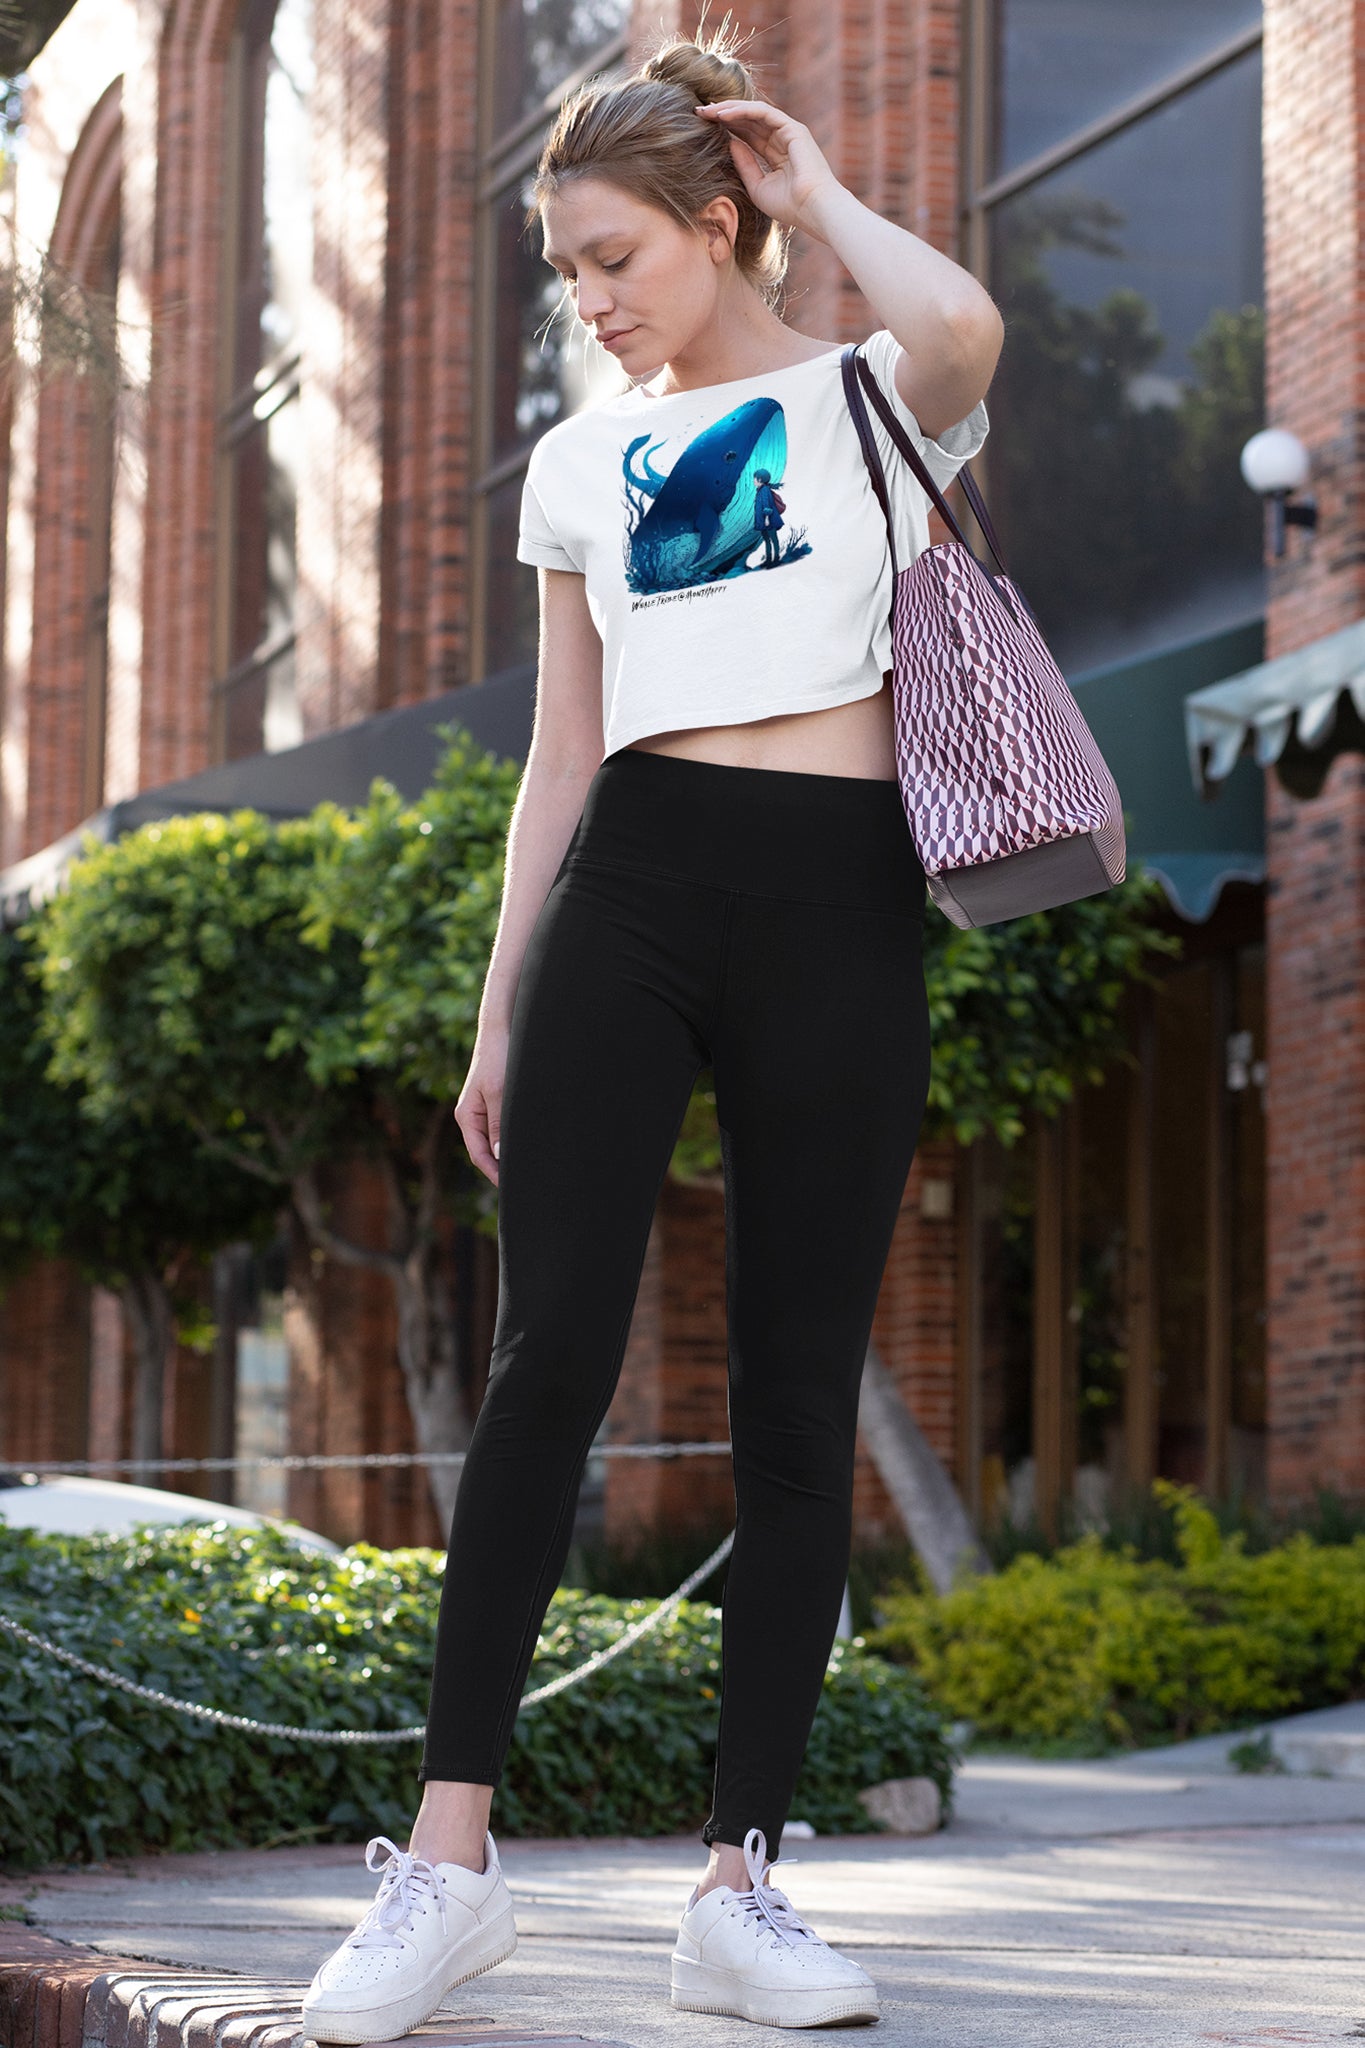 The Rising Blue Whale Women’s Crop Top